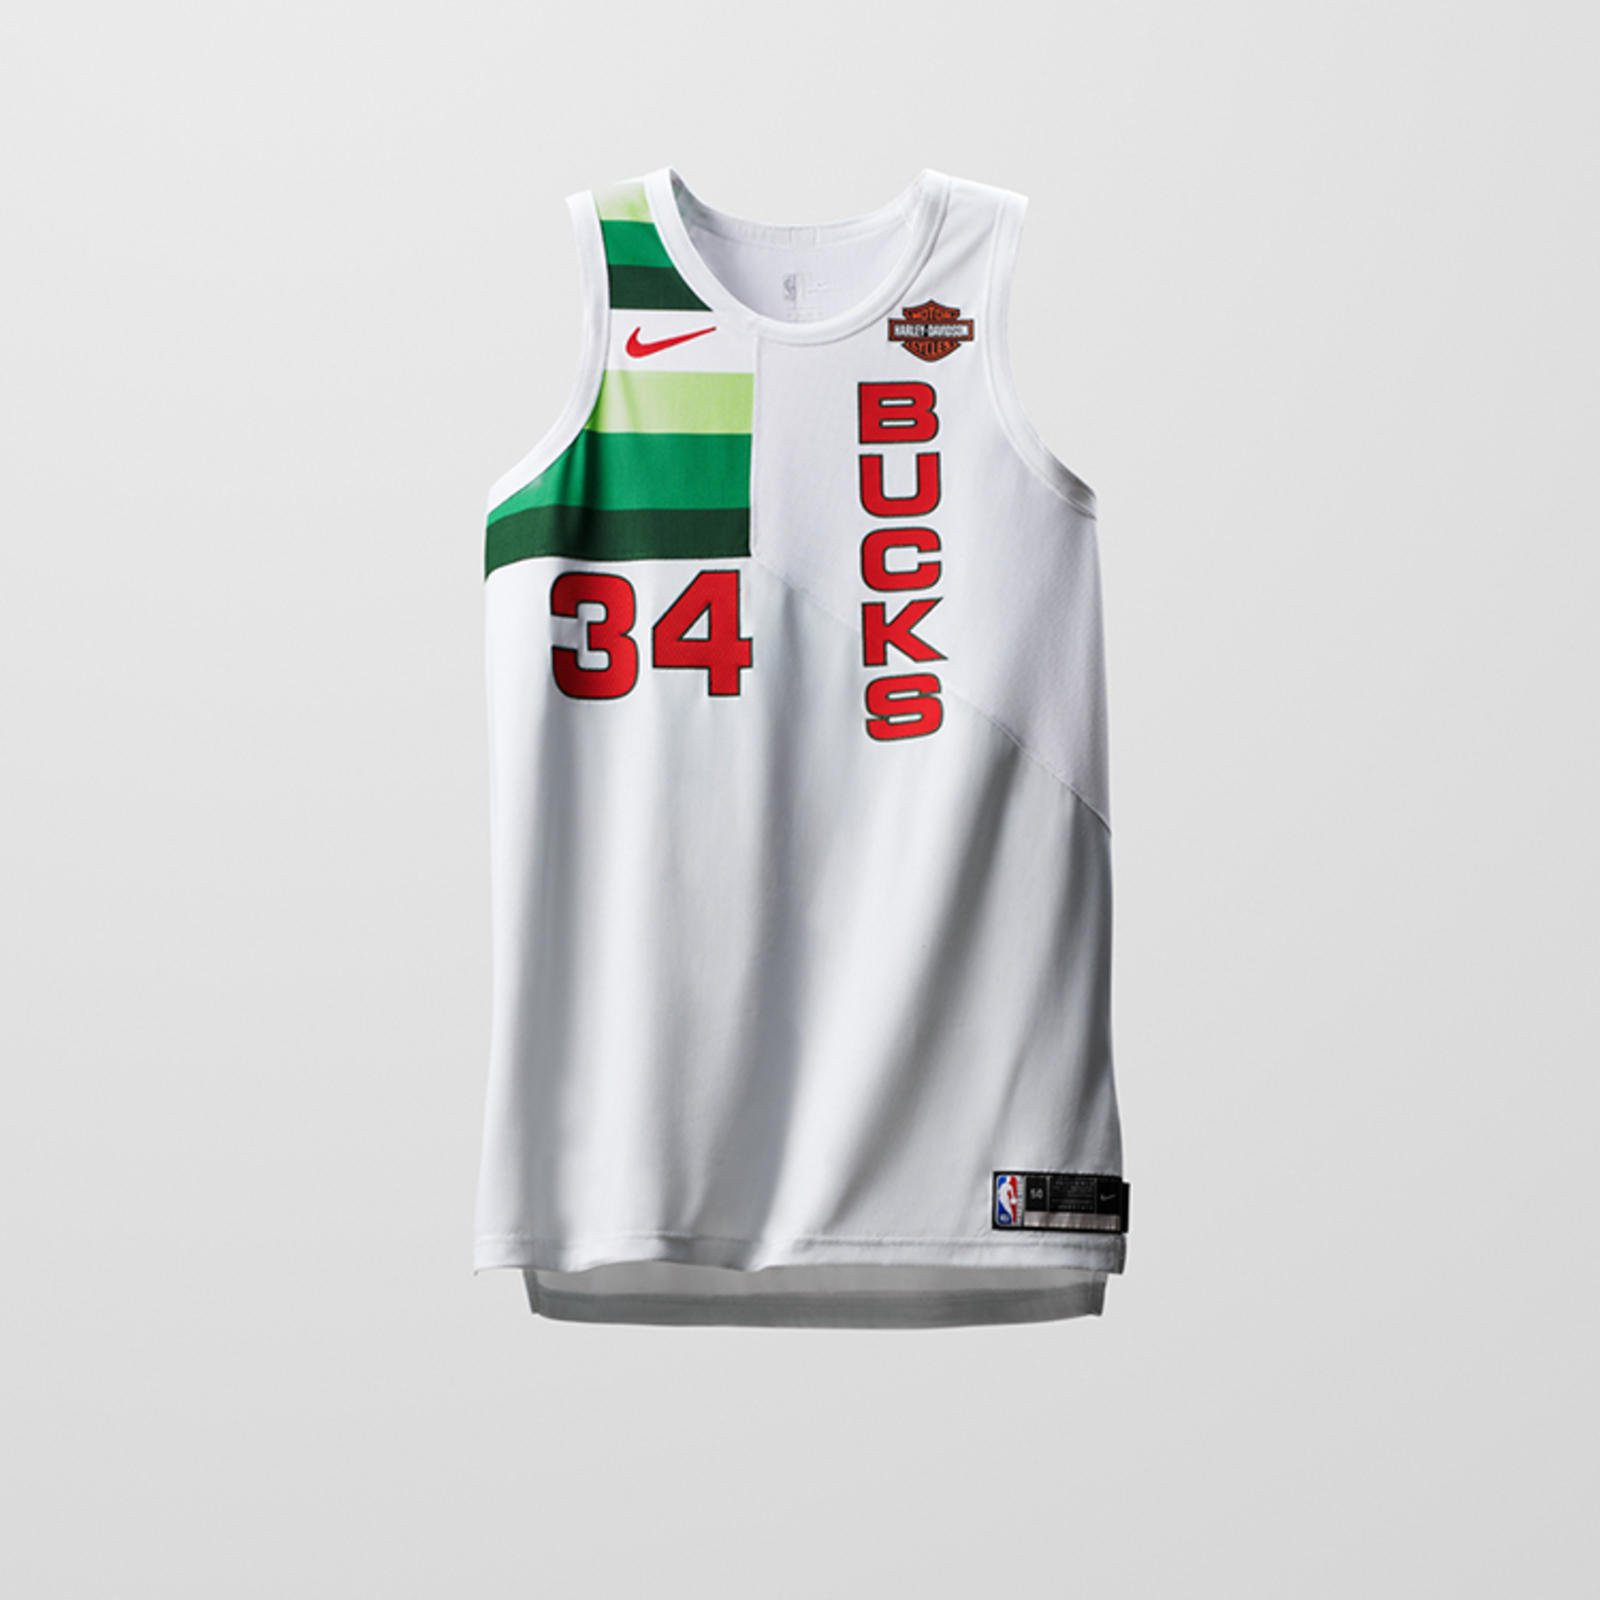 A look at the four jerseys in use by the Bucks in 2018-19